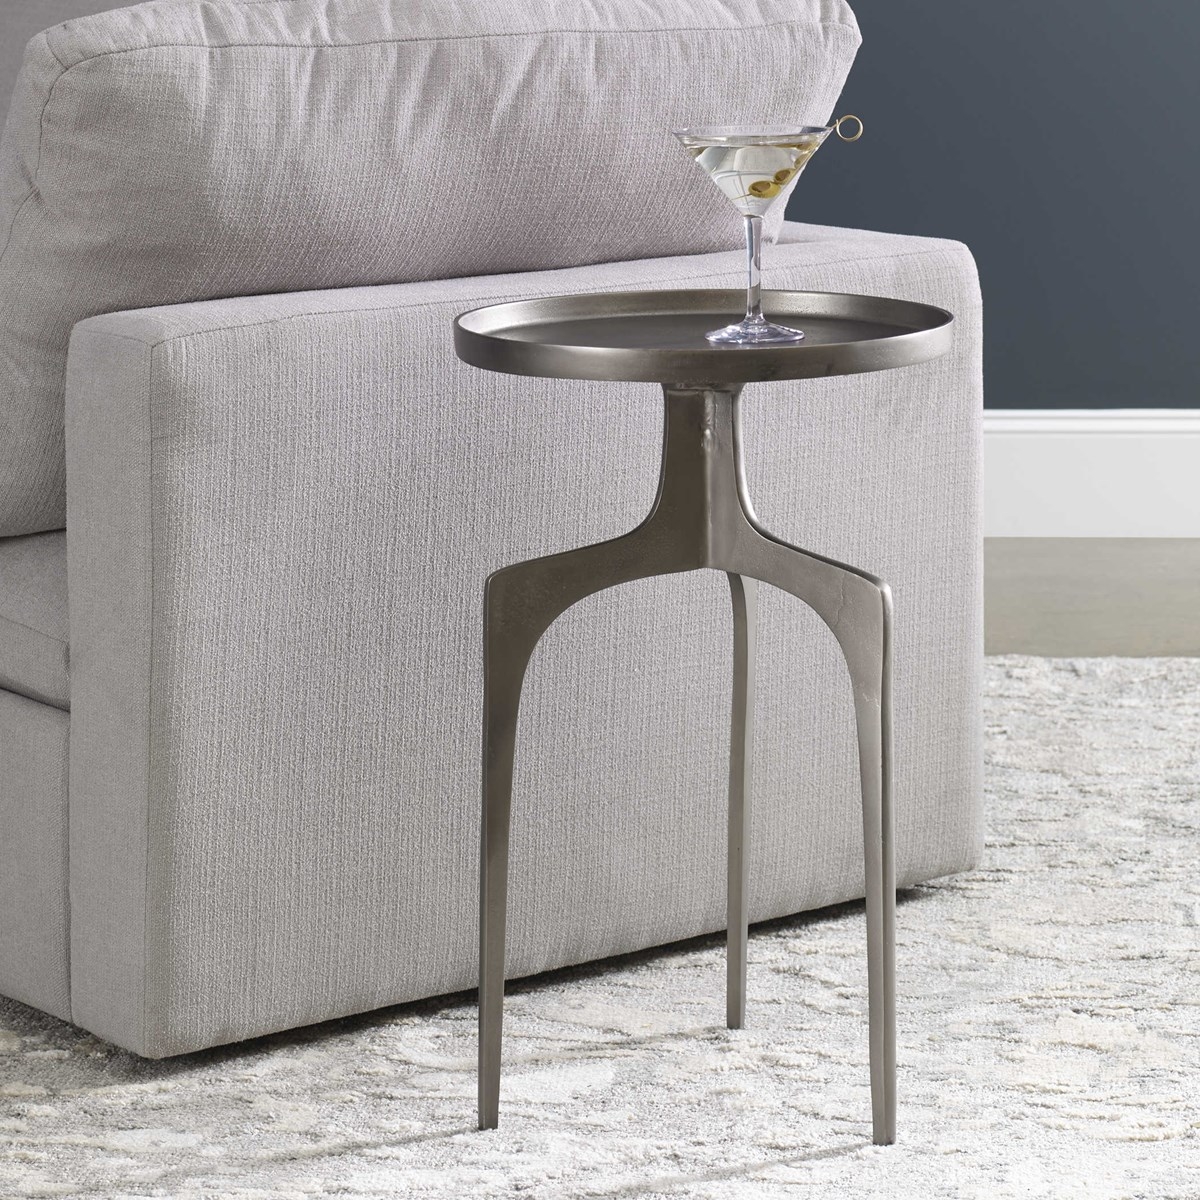 Kenna Nickel Accent Table - Image 1